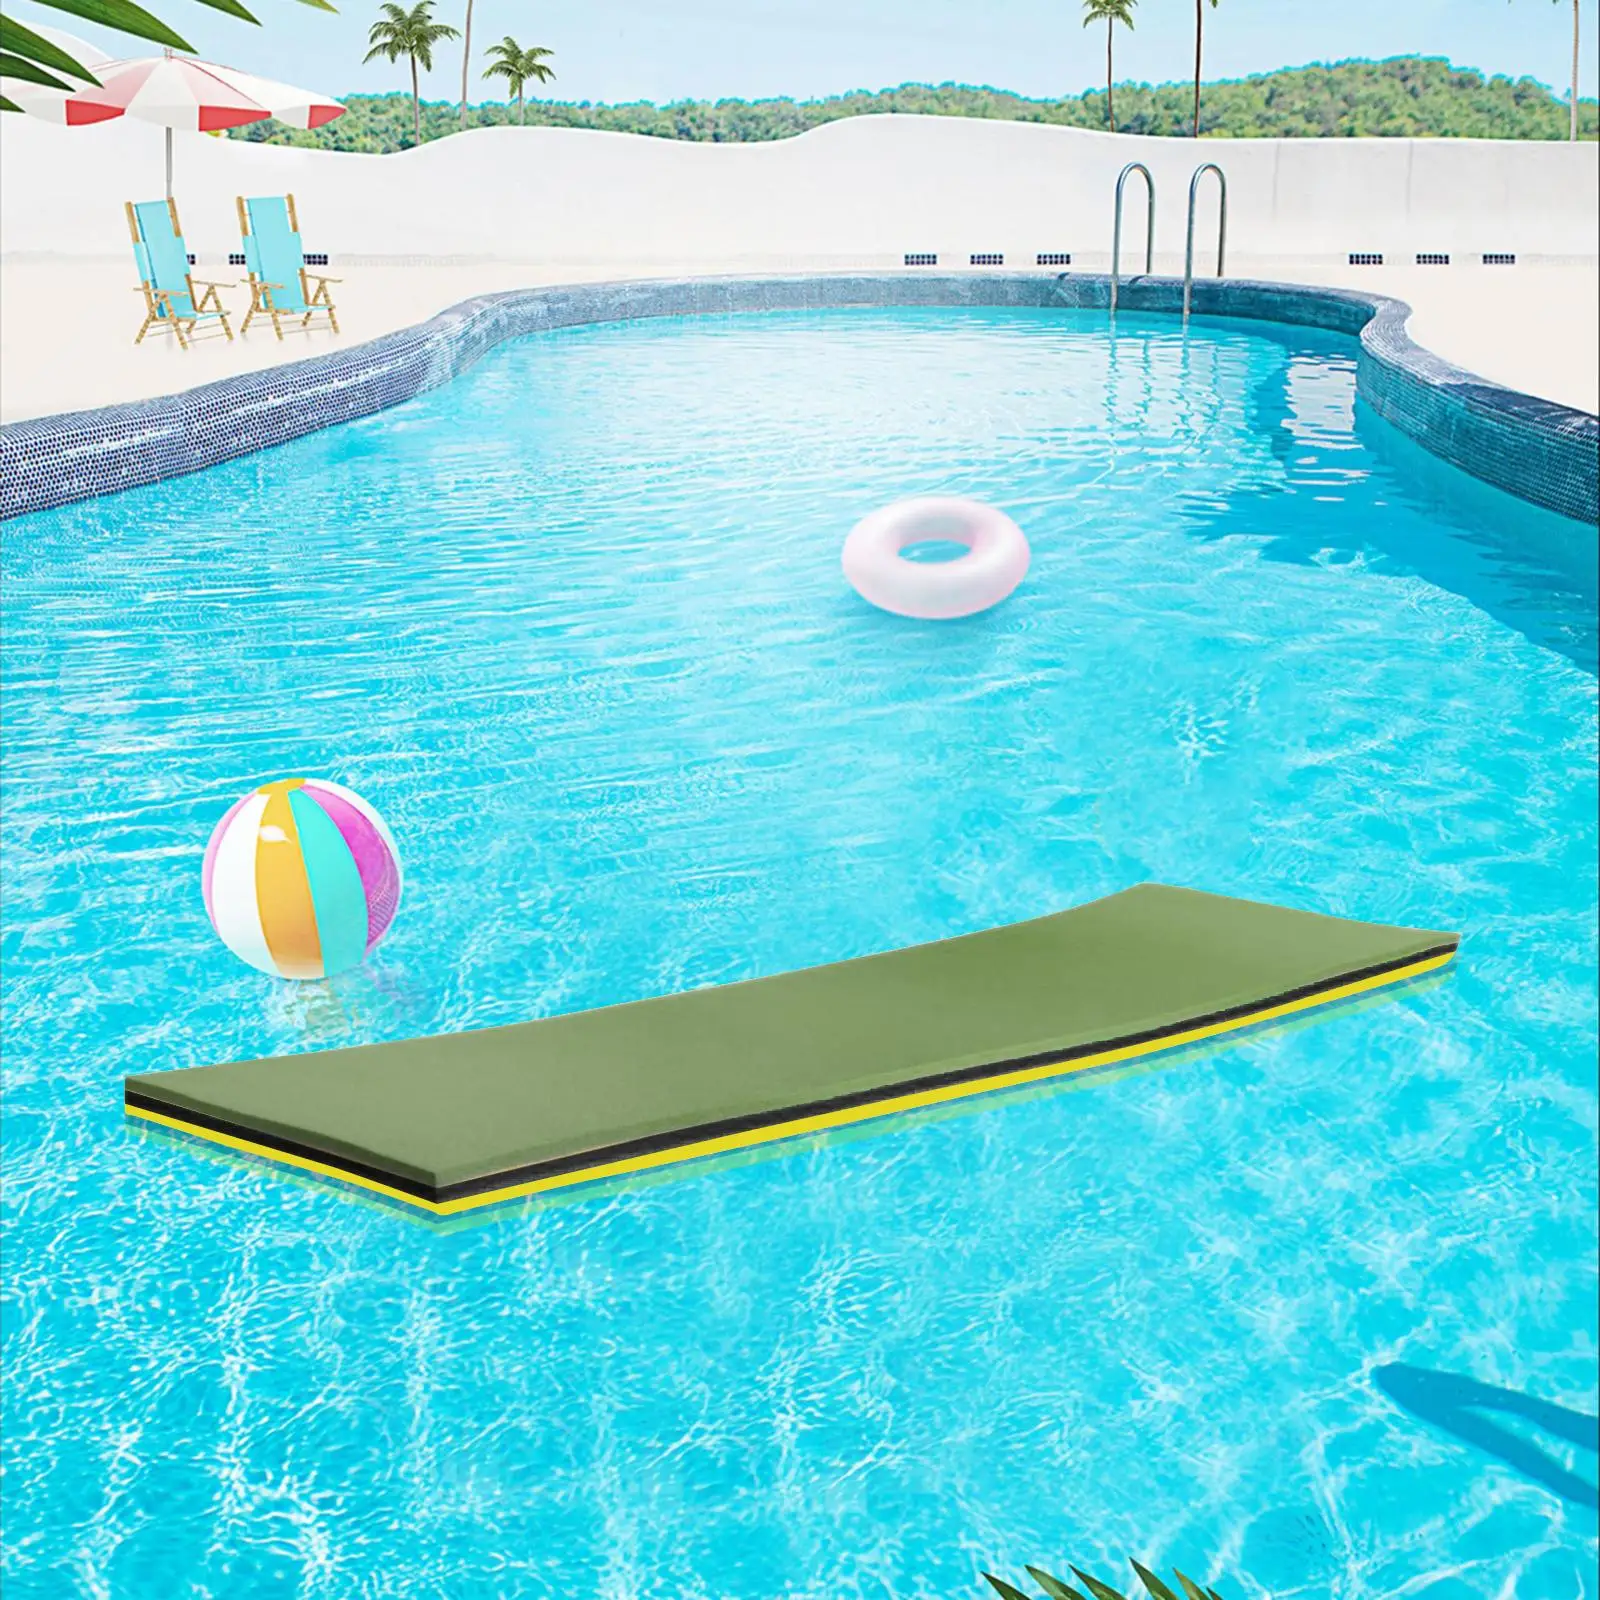 Floating Mat Water Pad Cushion 3 Layer Yellow Black Green 43x15.7x1.3inch for Relaxing Simple to Clean with Soap and  up Pad